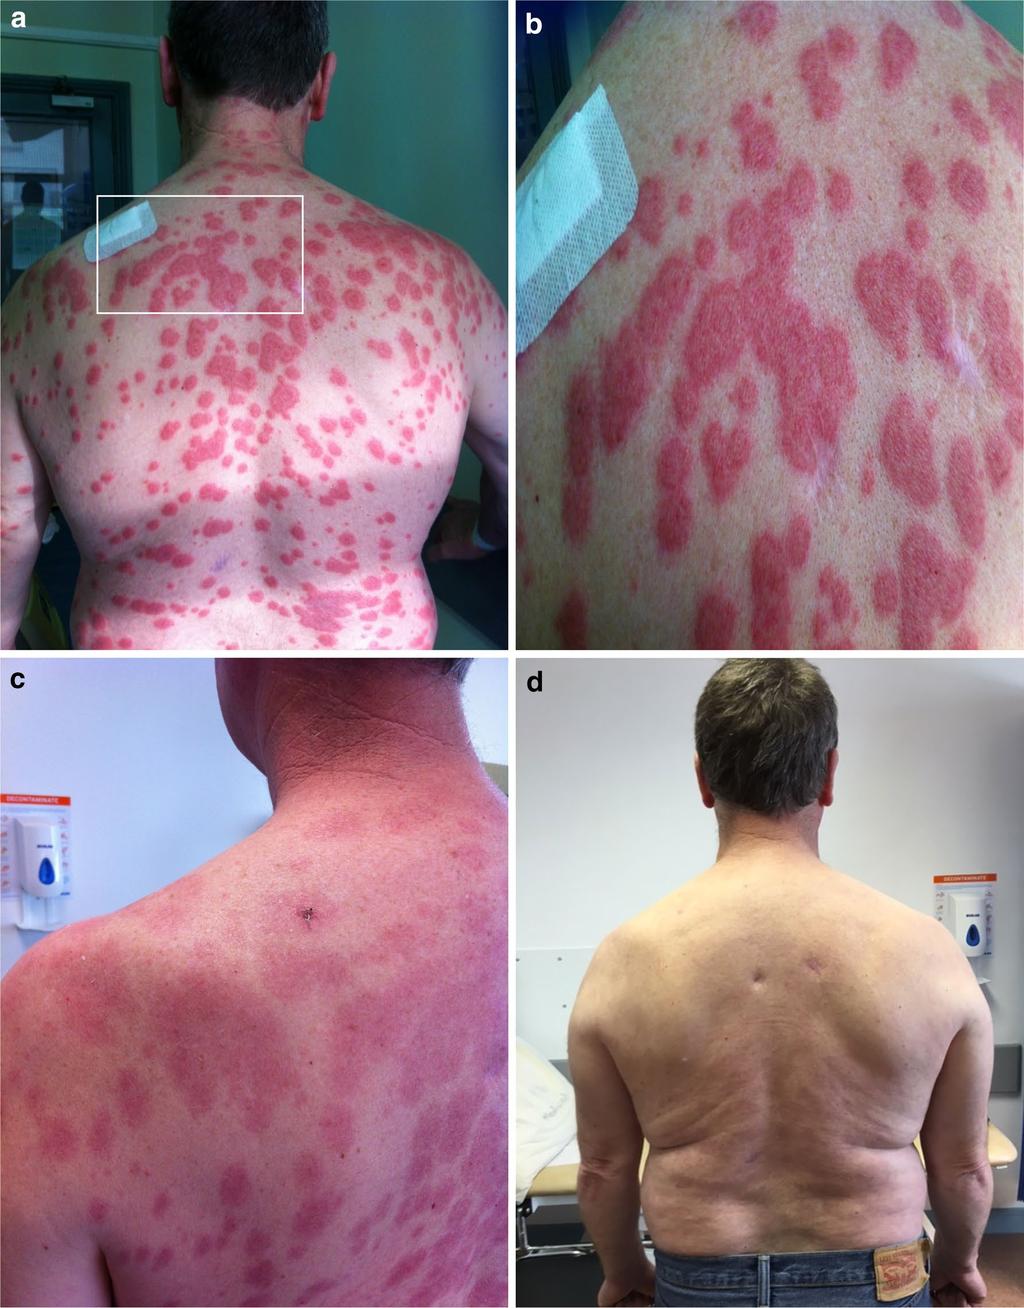 Page 3 of 5 Fig. 1 a Abrupt onset of disseminated painful skin lesions. b Target lesions visible with areas of confluence. c After 2 weeks of steroid therapy and AZA withdrawal.